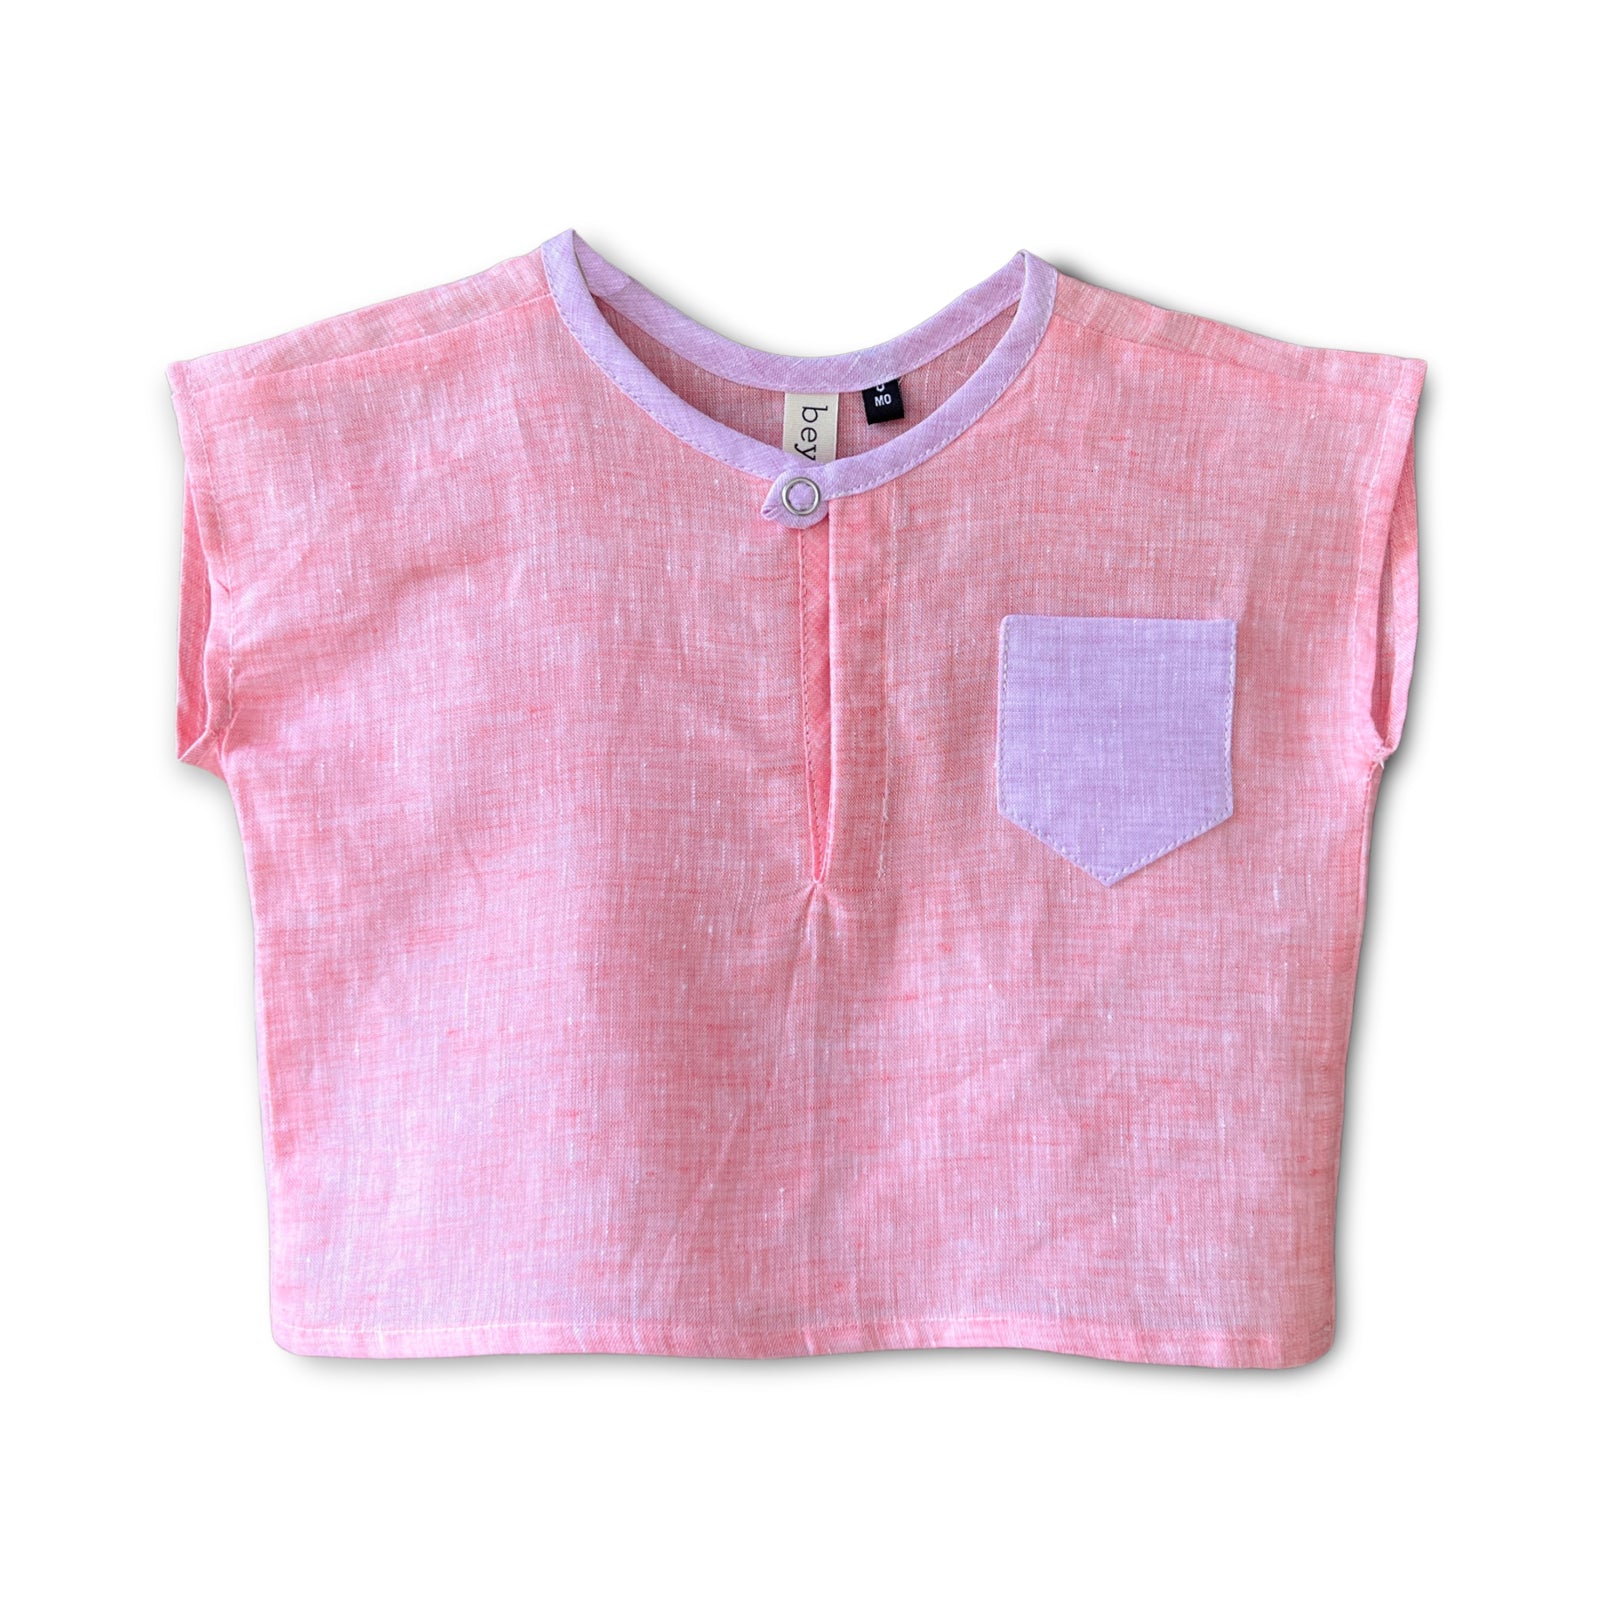 6m OOPS! Cotton Candy Linen Henley